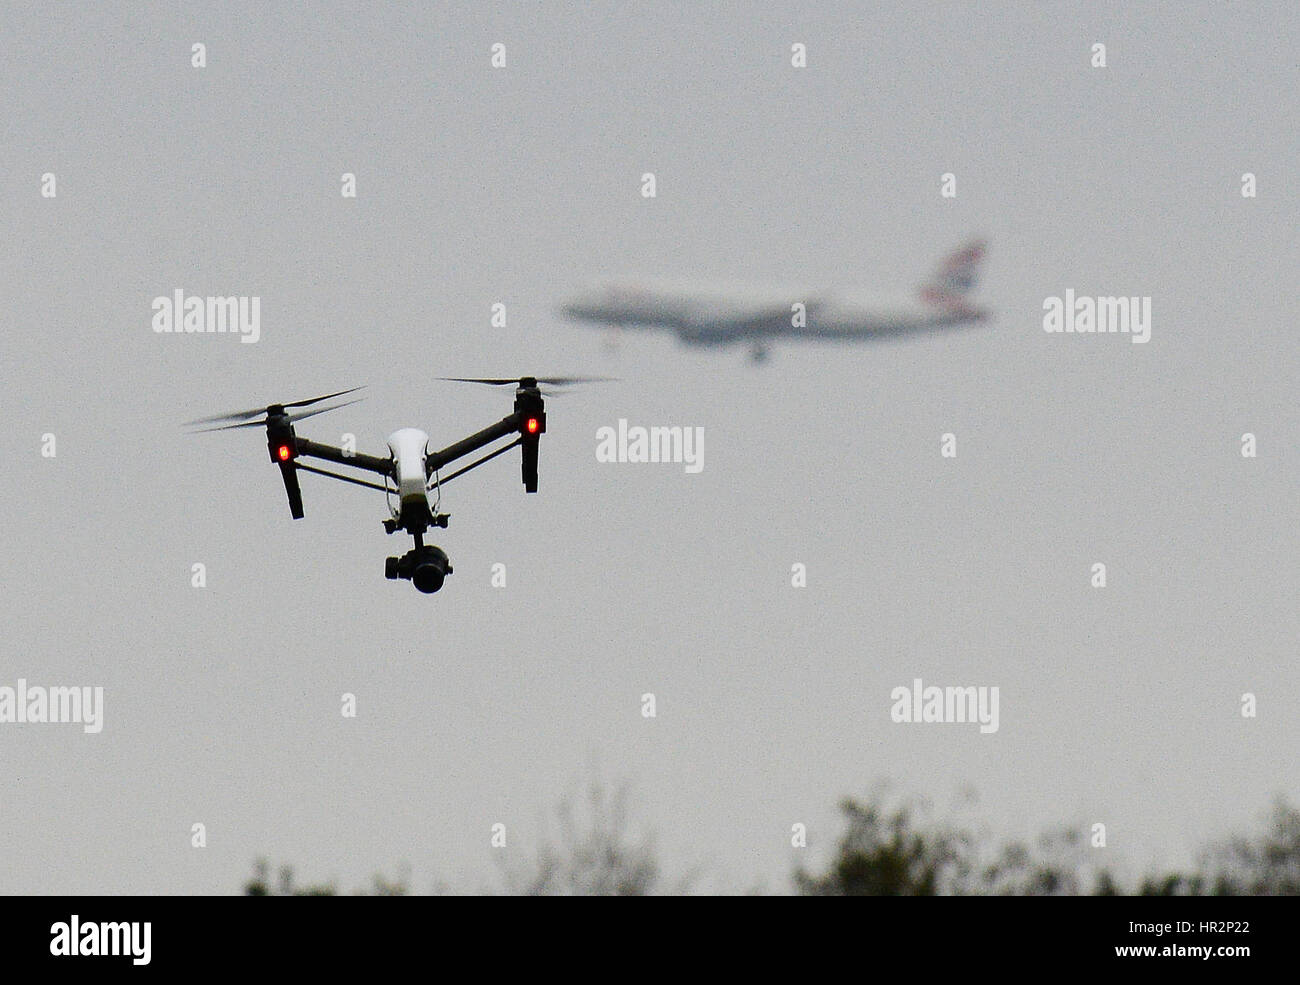 A drone flies in Hanworth Park in west London, as a British Airways 747 plane prepares to land at Heathrow Airport behind. Stock Photo